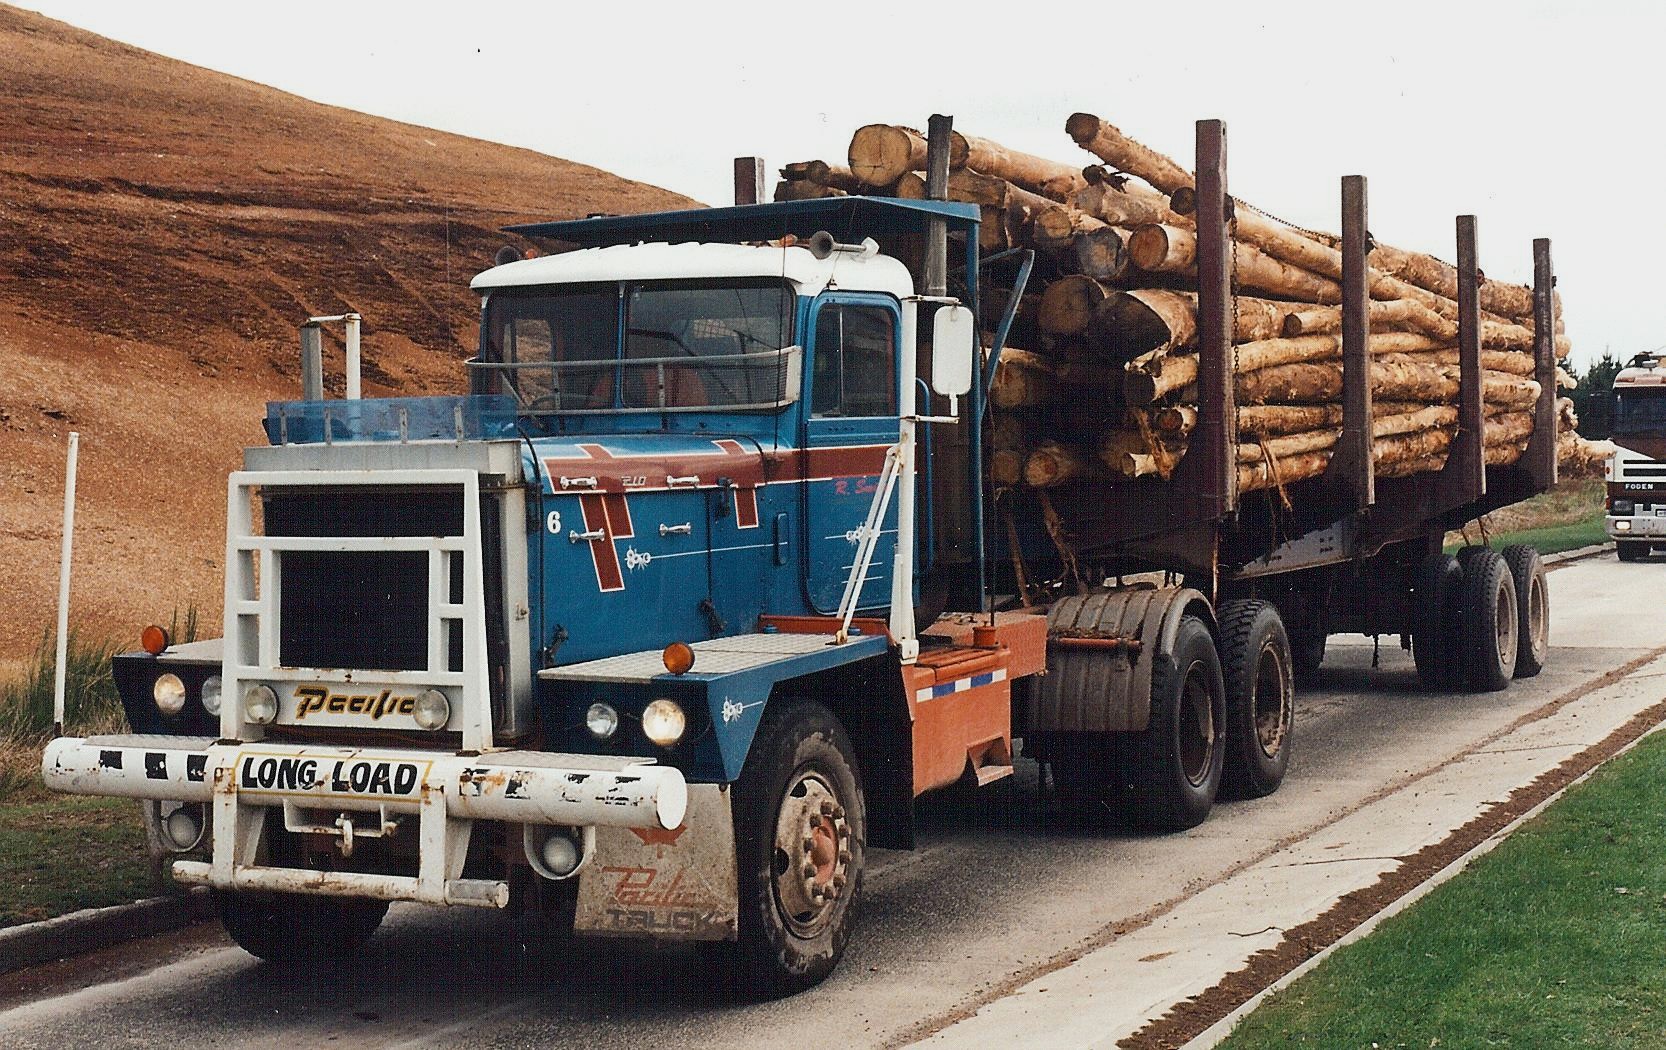 Pacific P-10 Logger | Flickr - Photo Sharing!